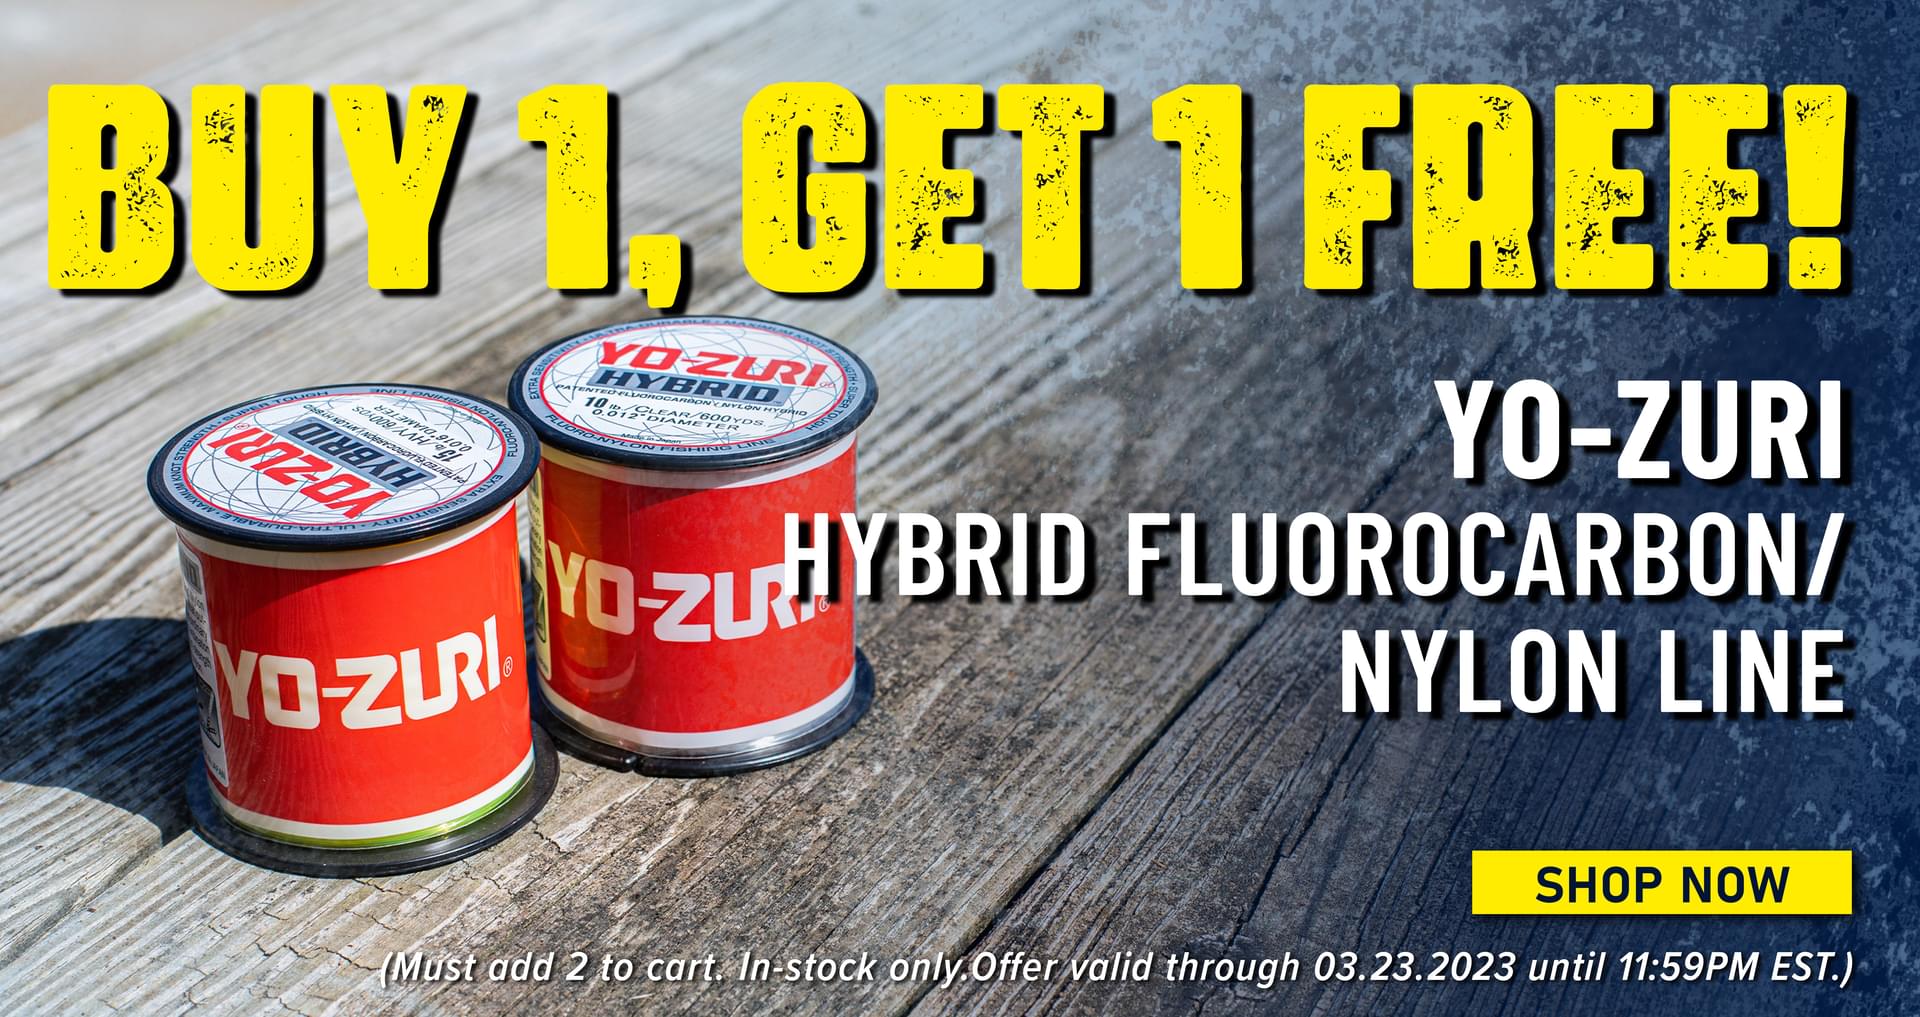 Buy 1, Get 1 Free! Yo-Zuri Hybrid Fluorocarbon / Nylon Line Shop Now (Must add 2 to cart. In-stock only. Offer valid through 03.23.2023 until 11:59PM EST.)